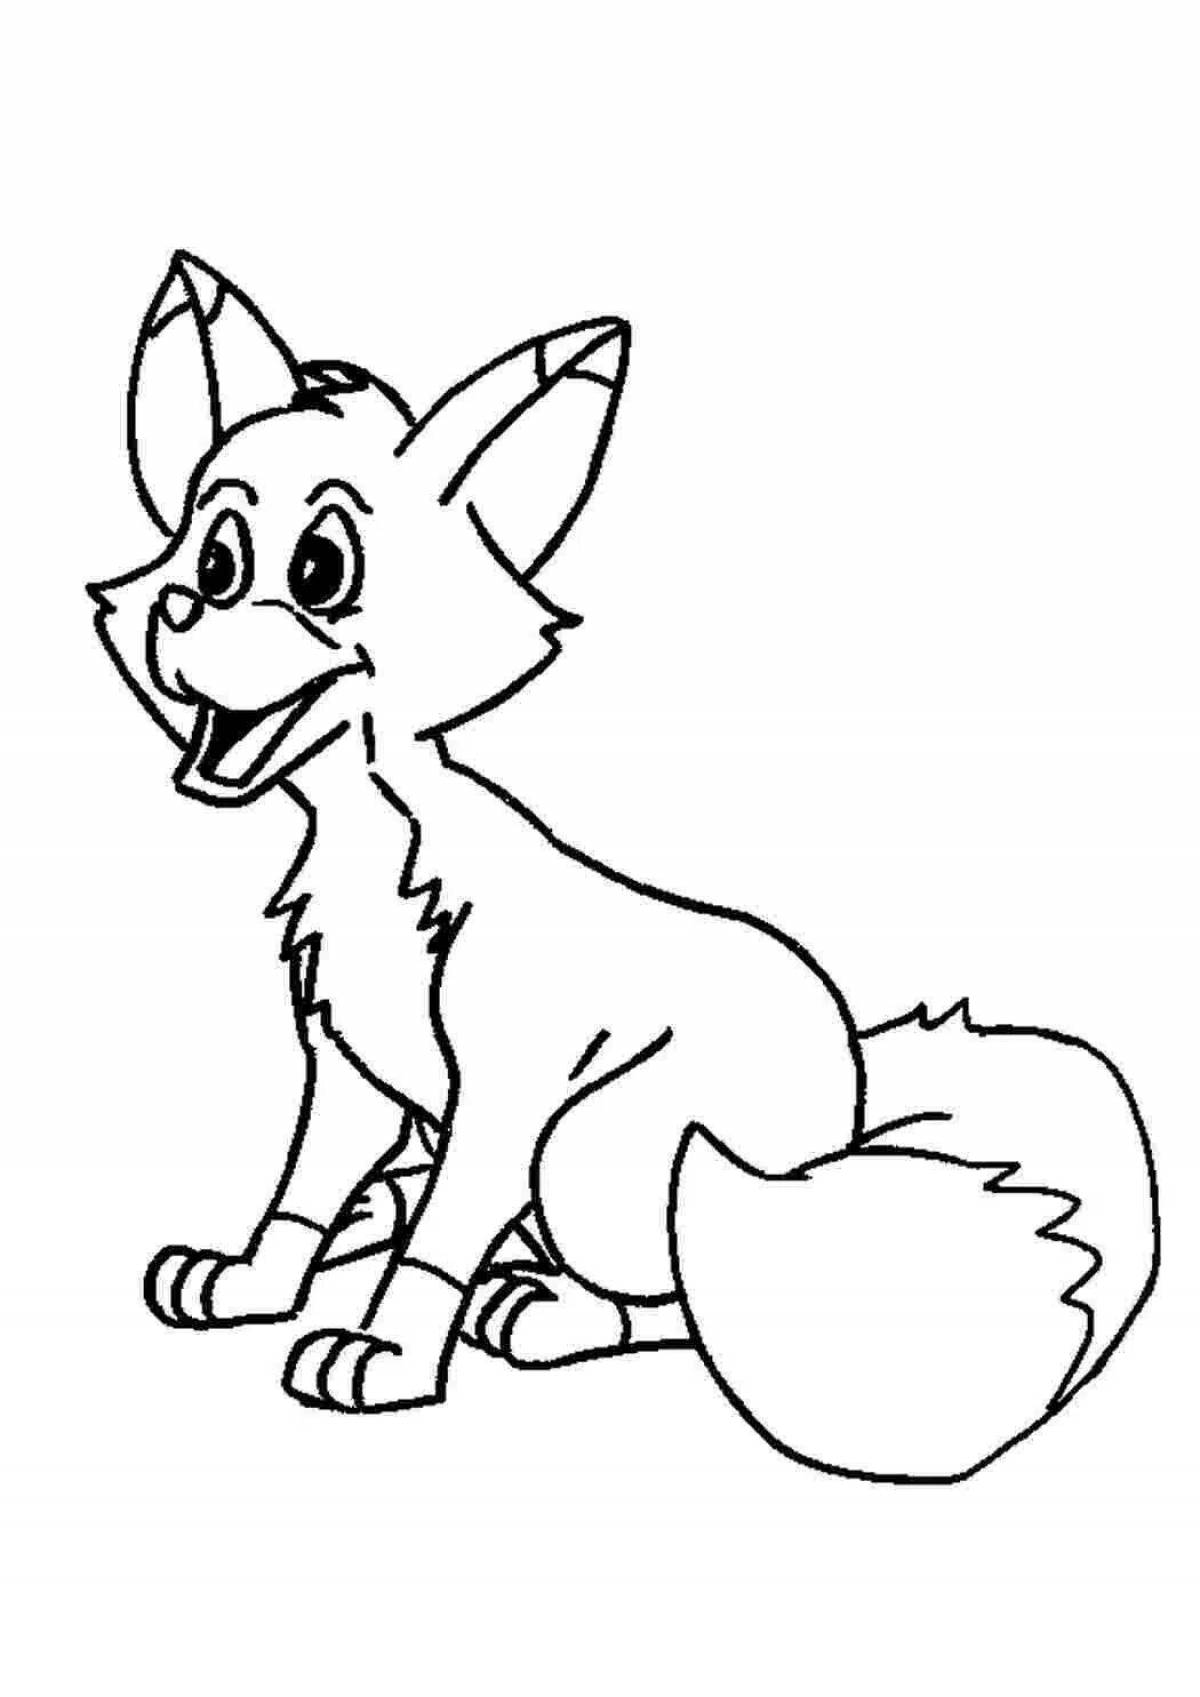 Bright fox coloring book for 2-3 year olds